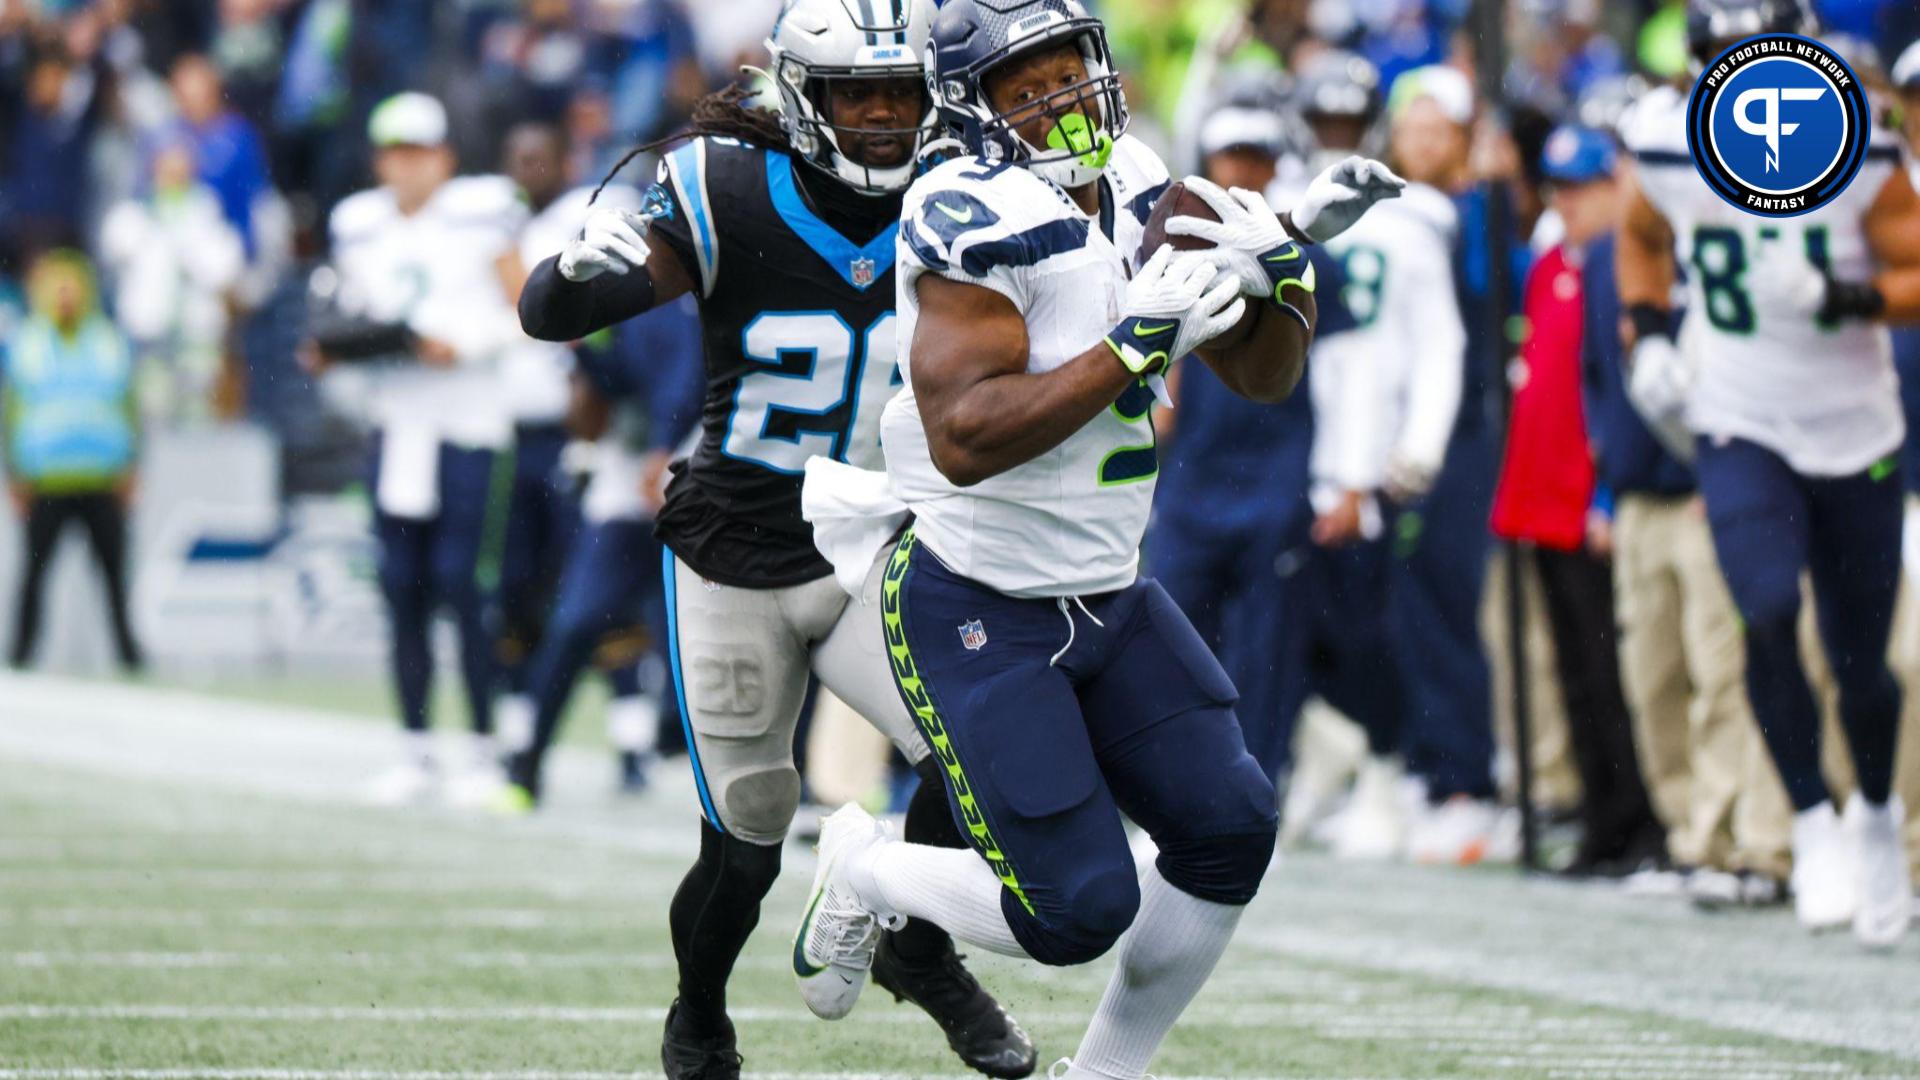 Seattle Seahawks RB Kenneth Walker III (9) catches a pass against the Carolina Panthers.